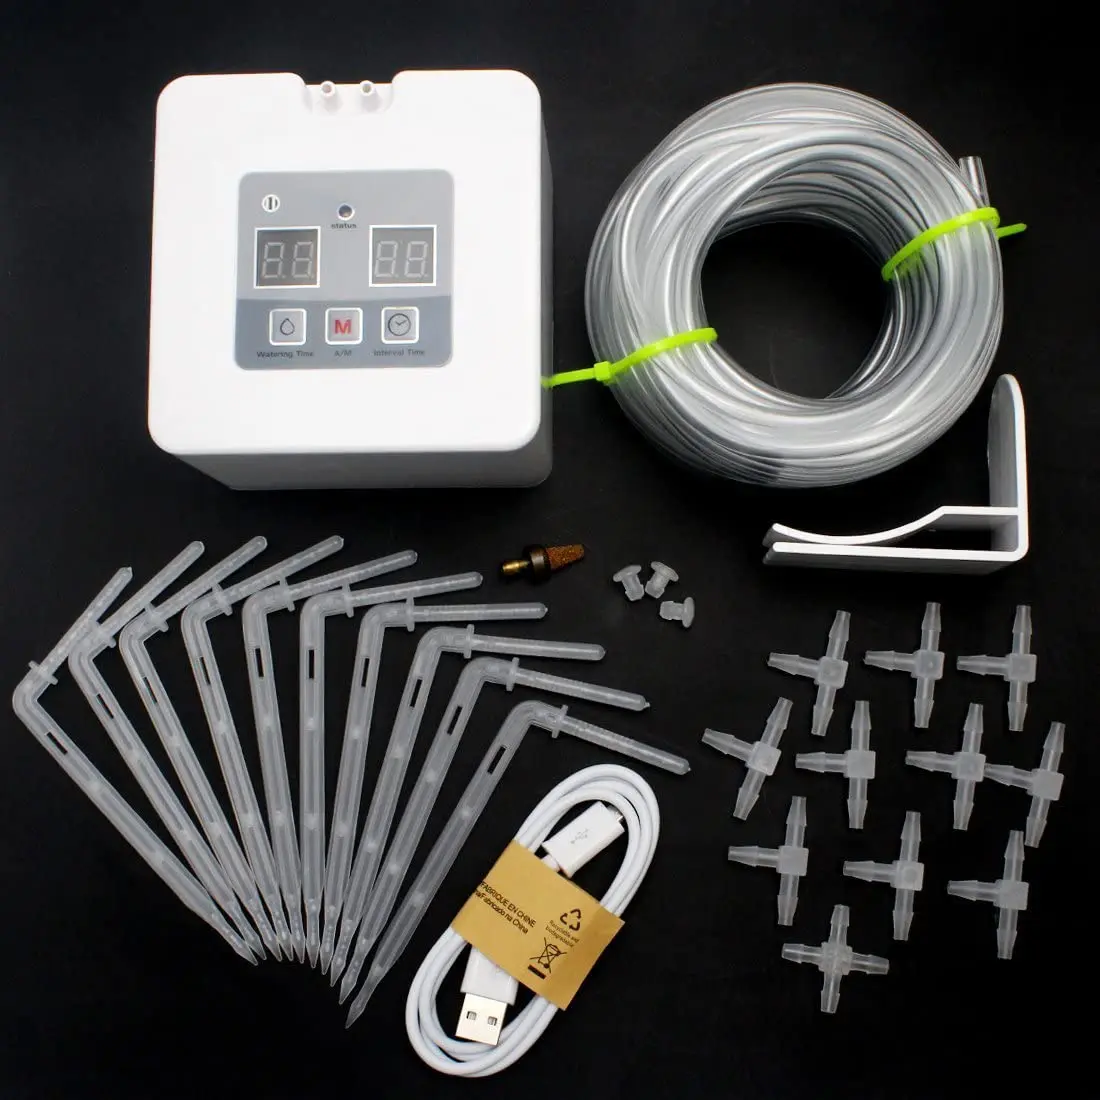 Micro Automatic Garden Drip Irrigation Timer System Self Watering Kit Balcony Us 